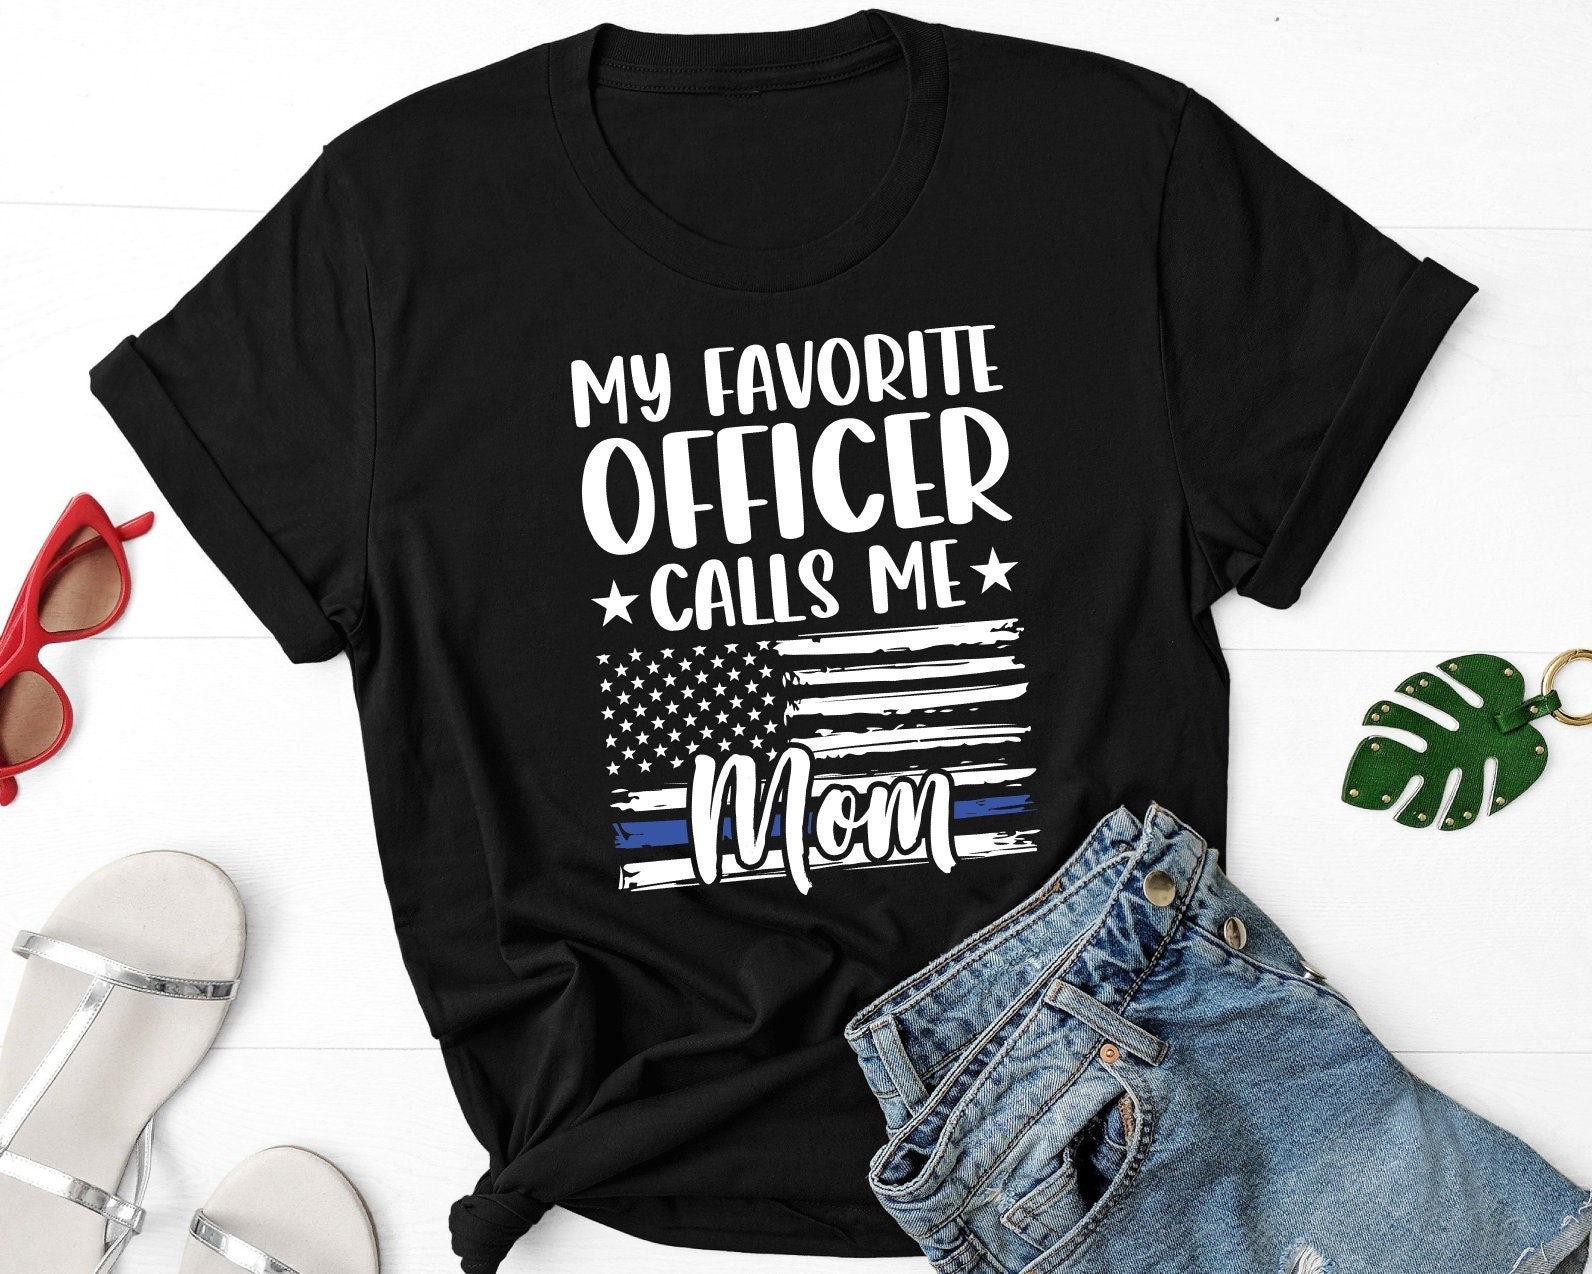 Police Officer Gifts for Men Police Officer Gifts Police Wife Law  Enforcement Gifts Police Retirement Gifts Police Academy Graduation Gifts 